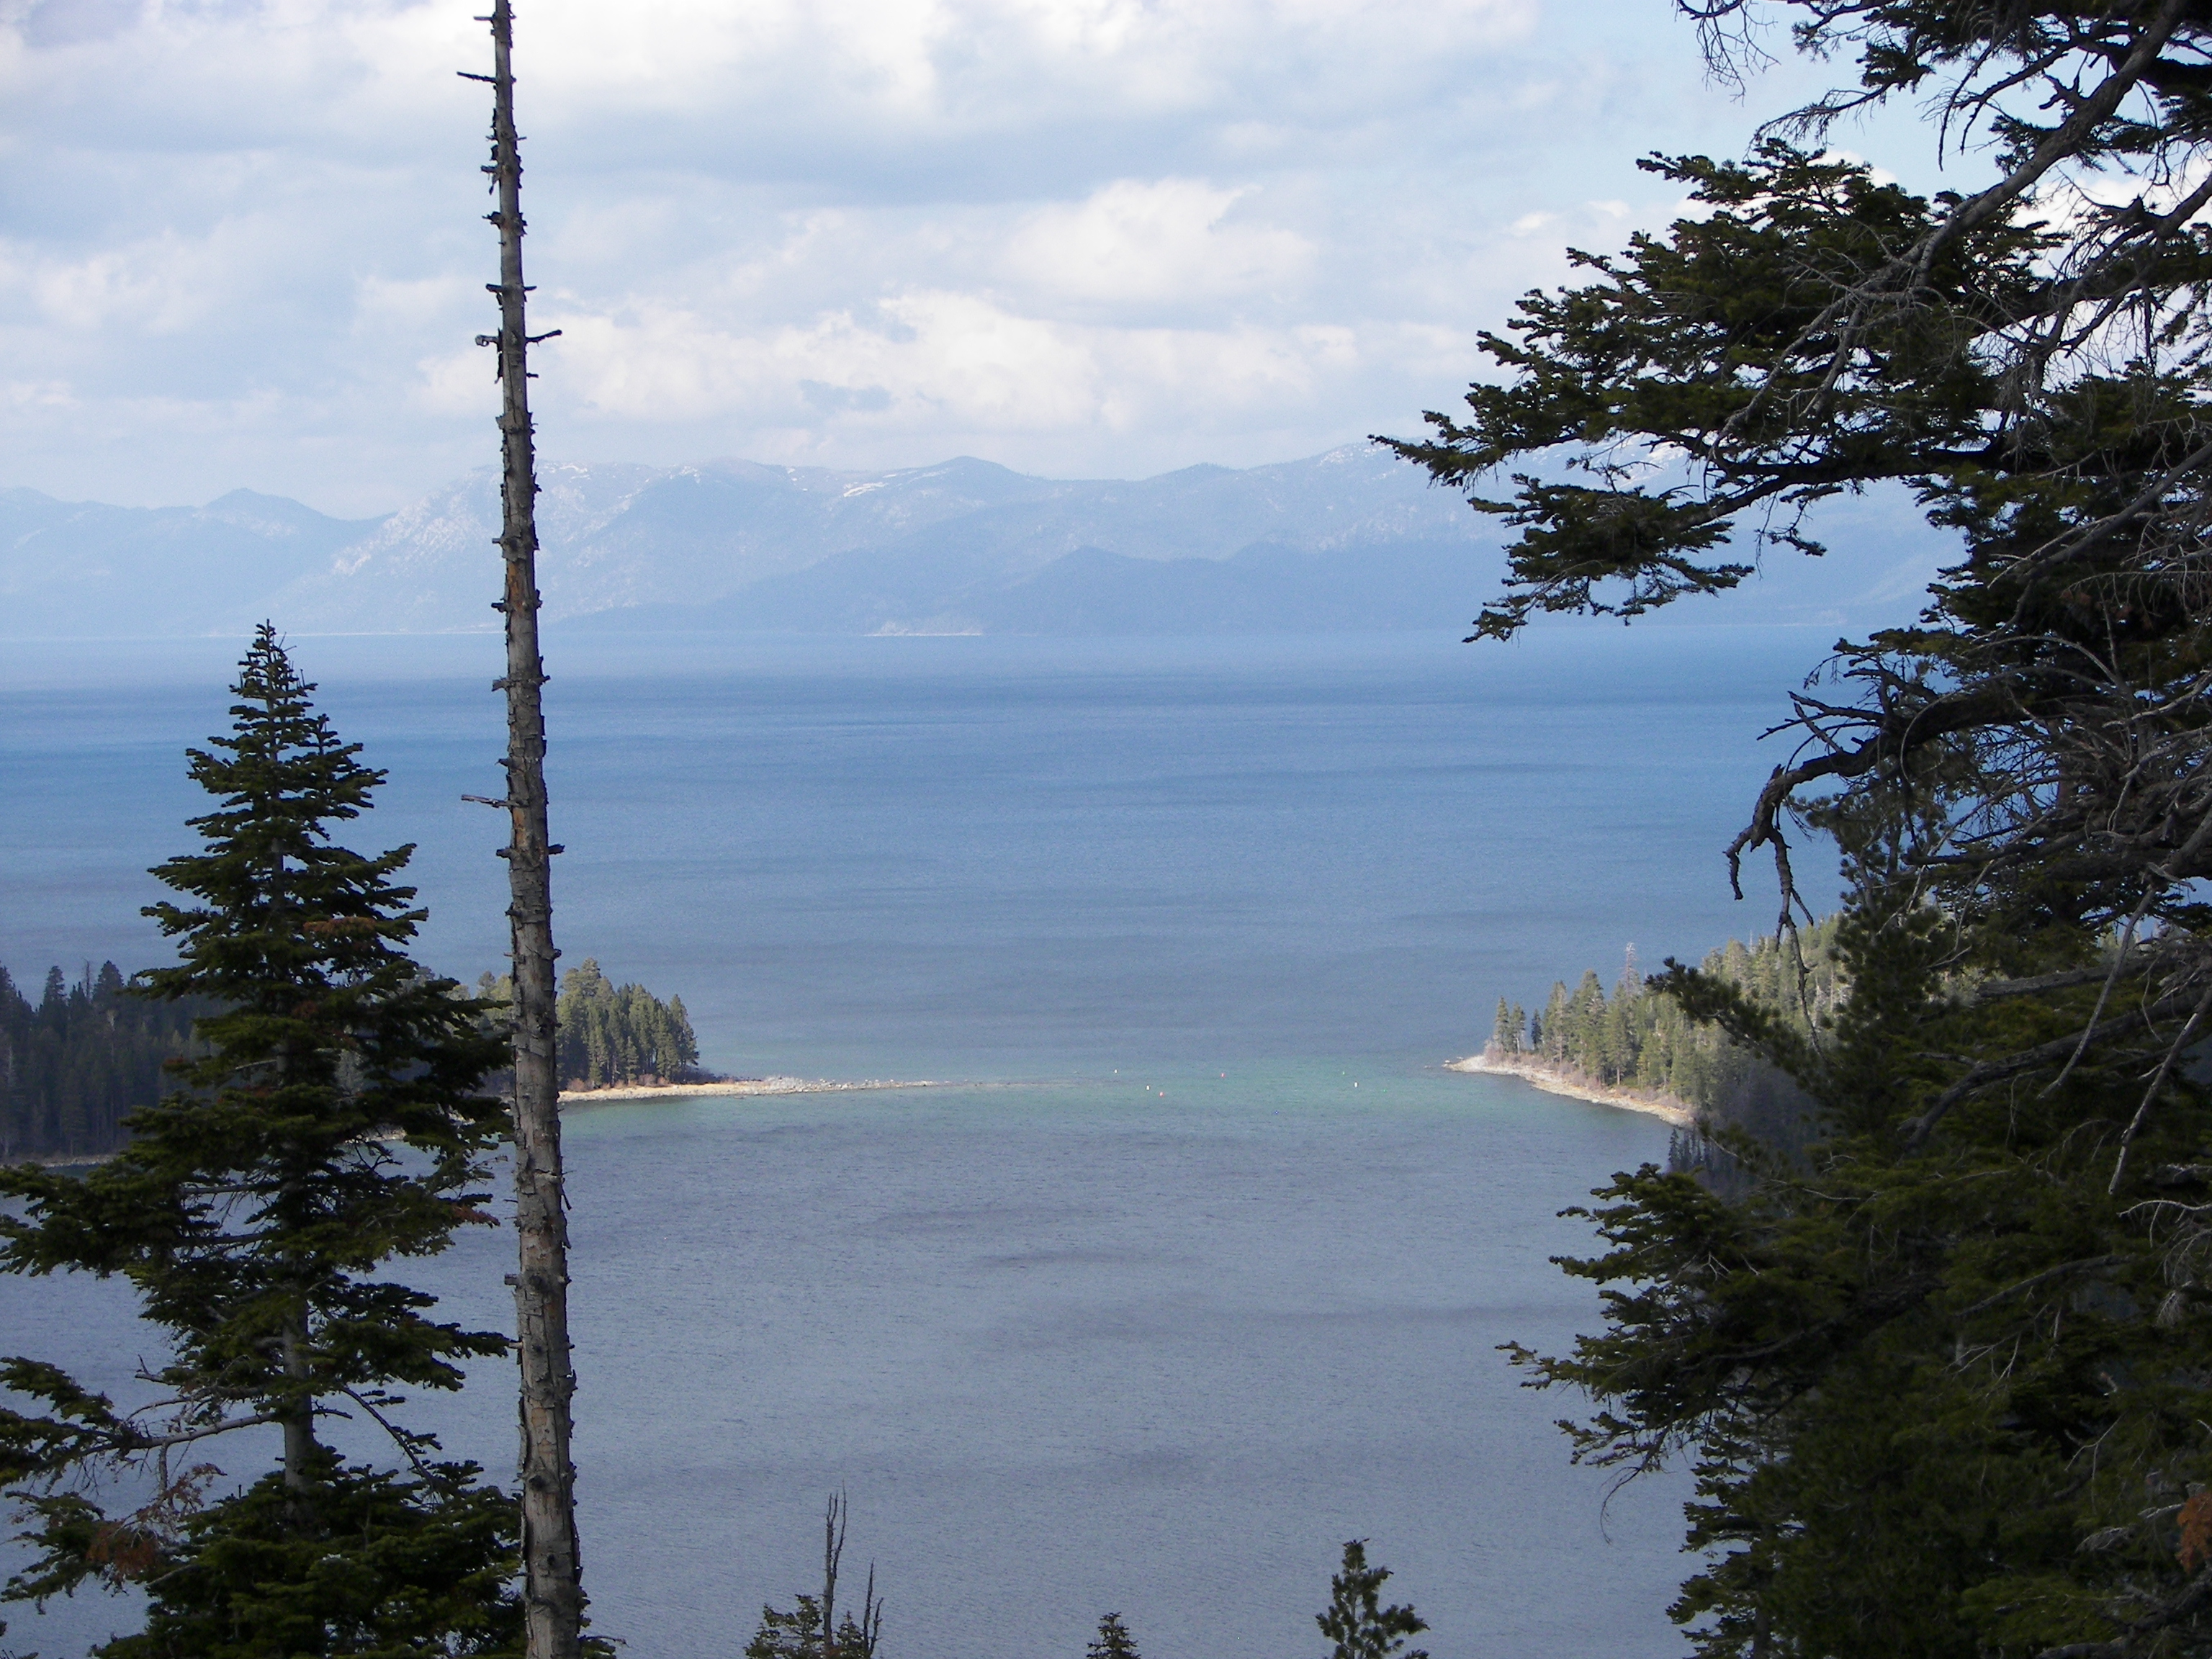 View of Lake Tahoe from Emerald Bay